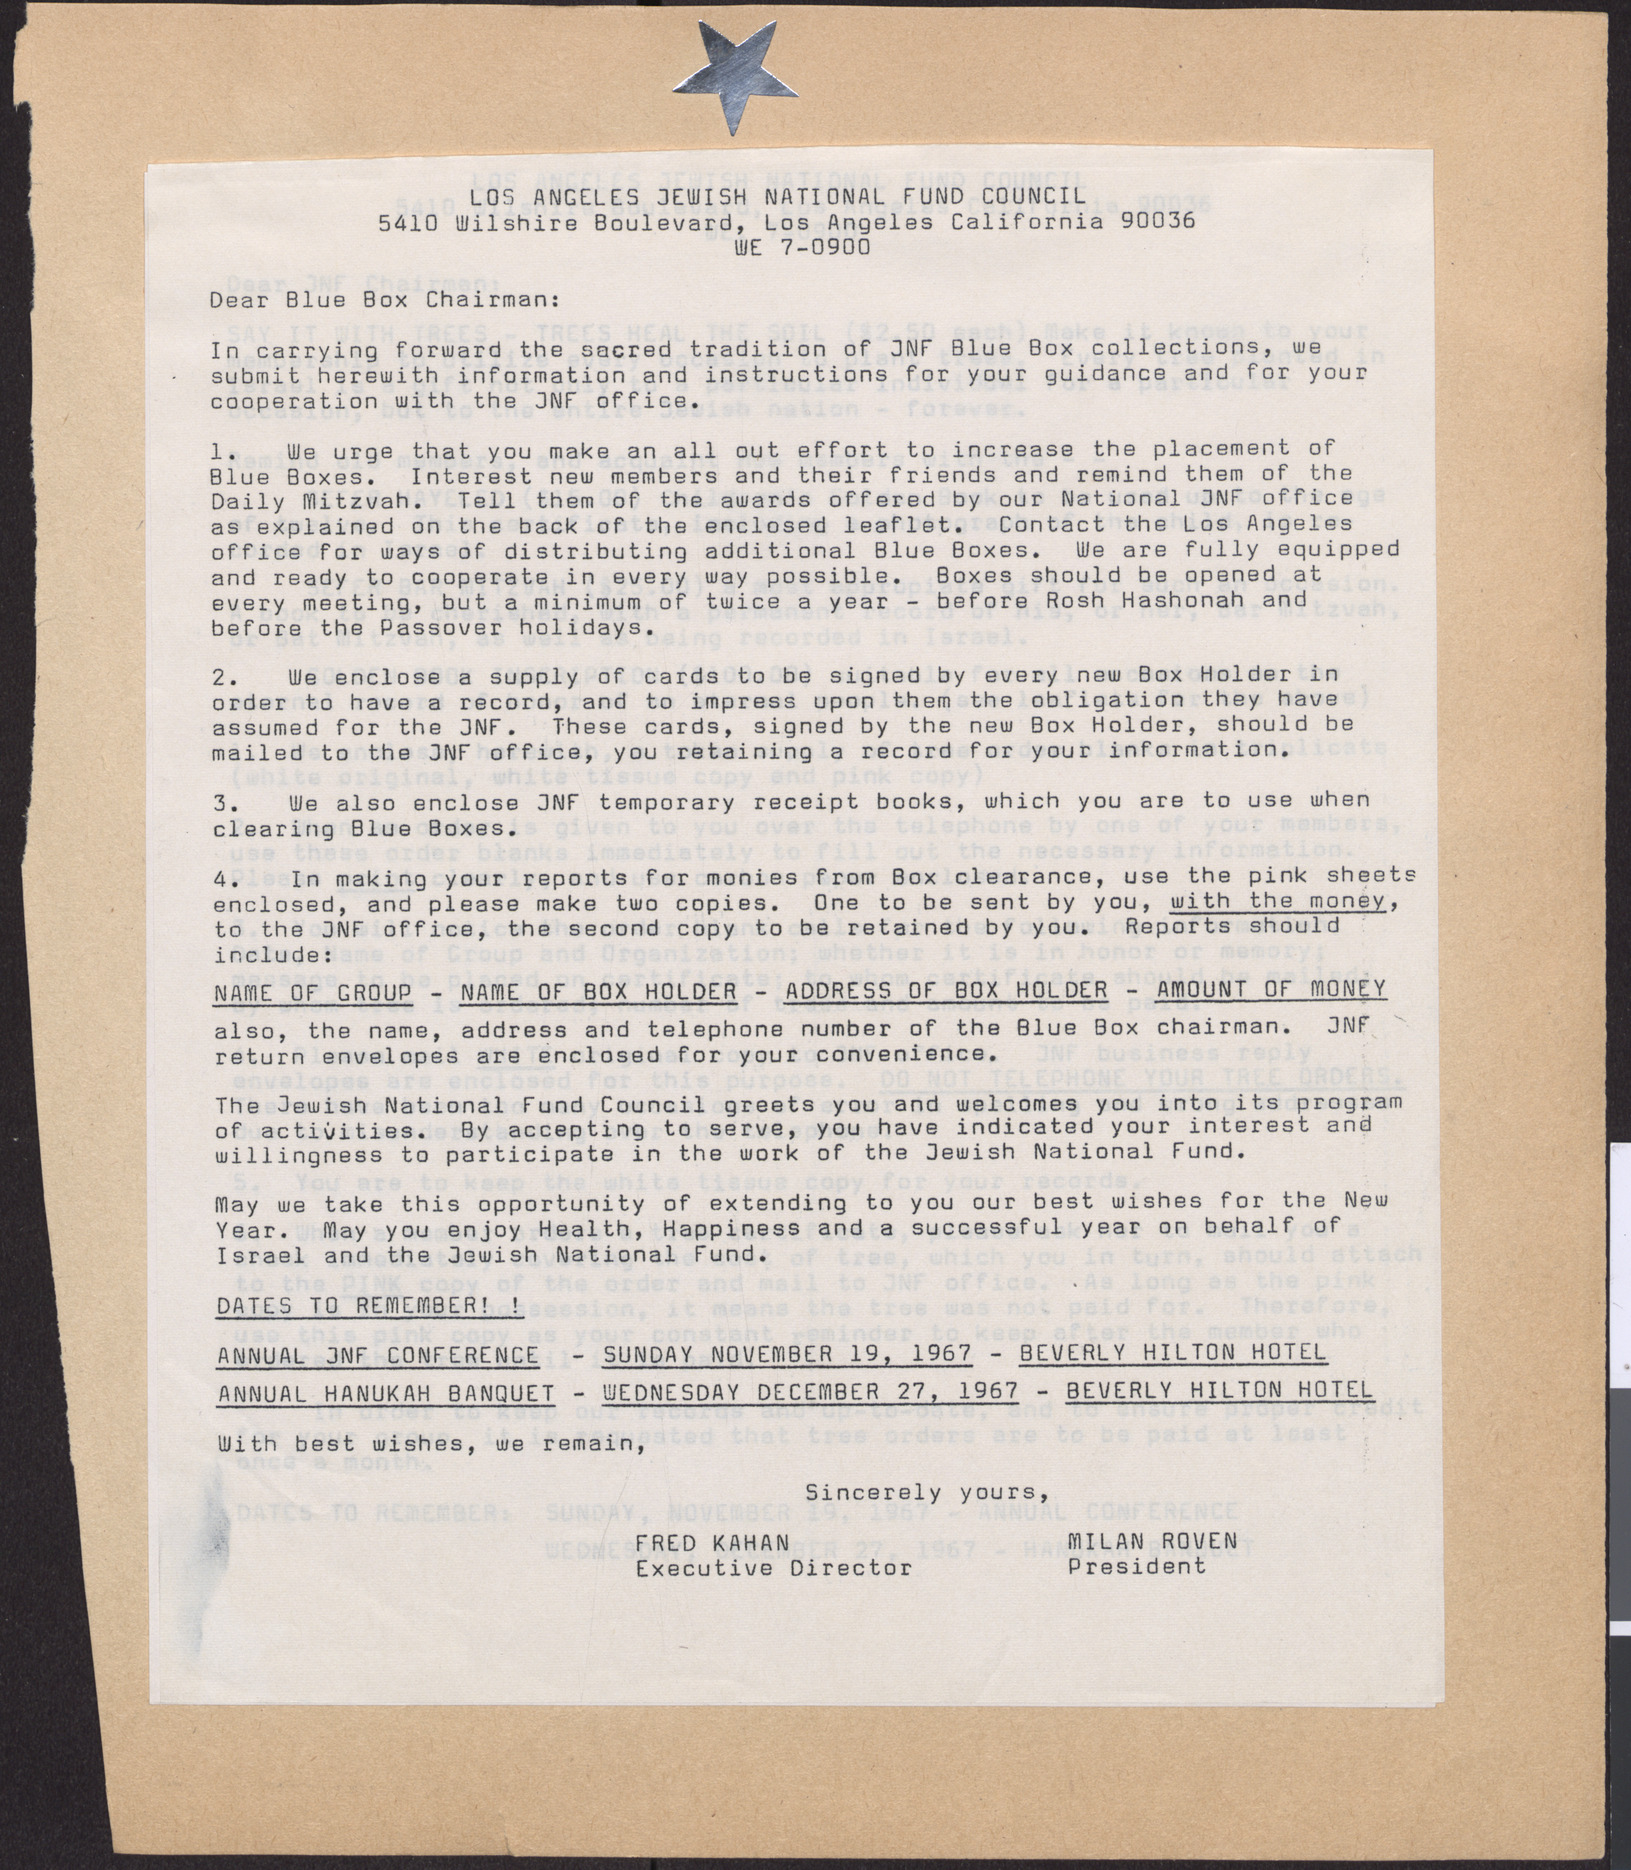 Letter from Fred Kahan and Milan Roven to Blue Box Chairman, Los Angeles Jewish National Fund, 1967, page 1